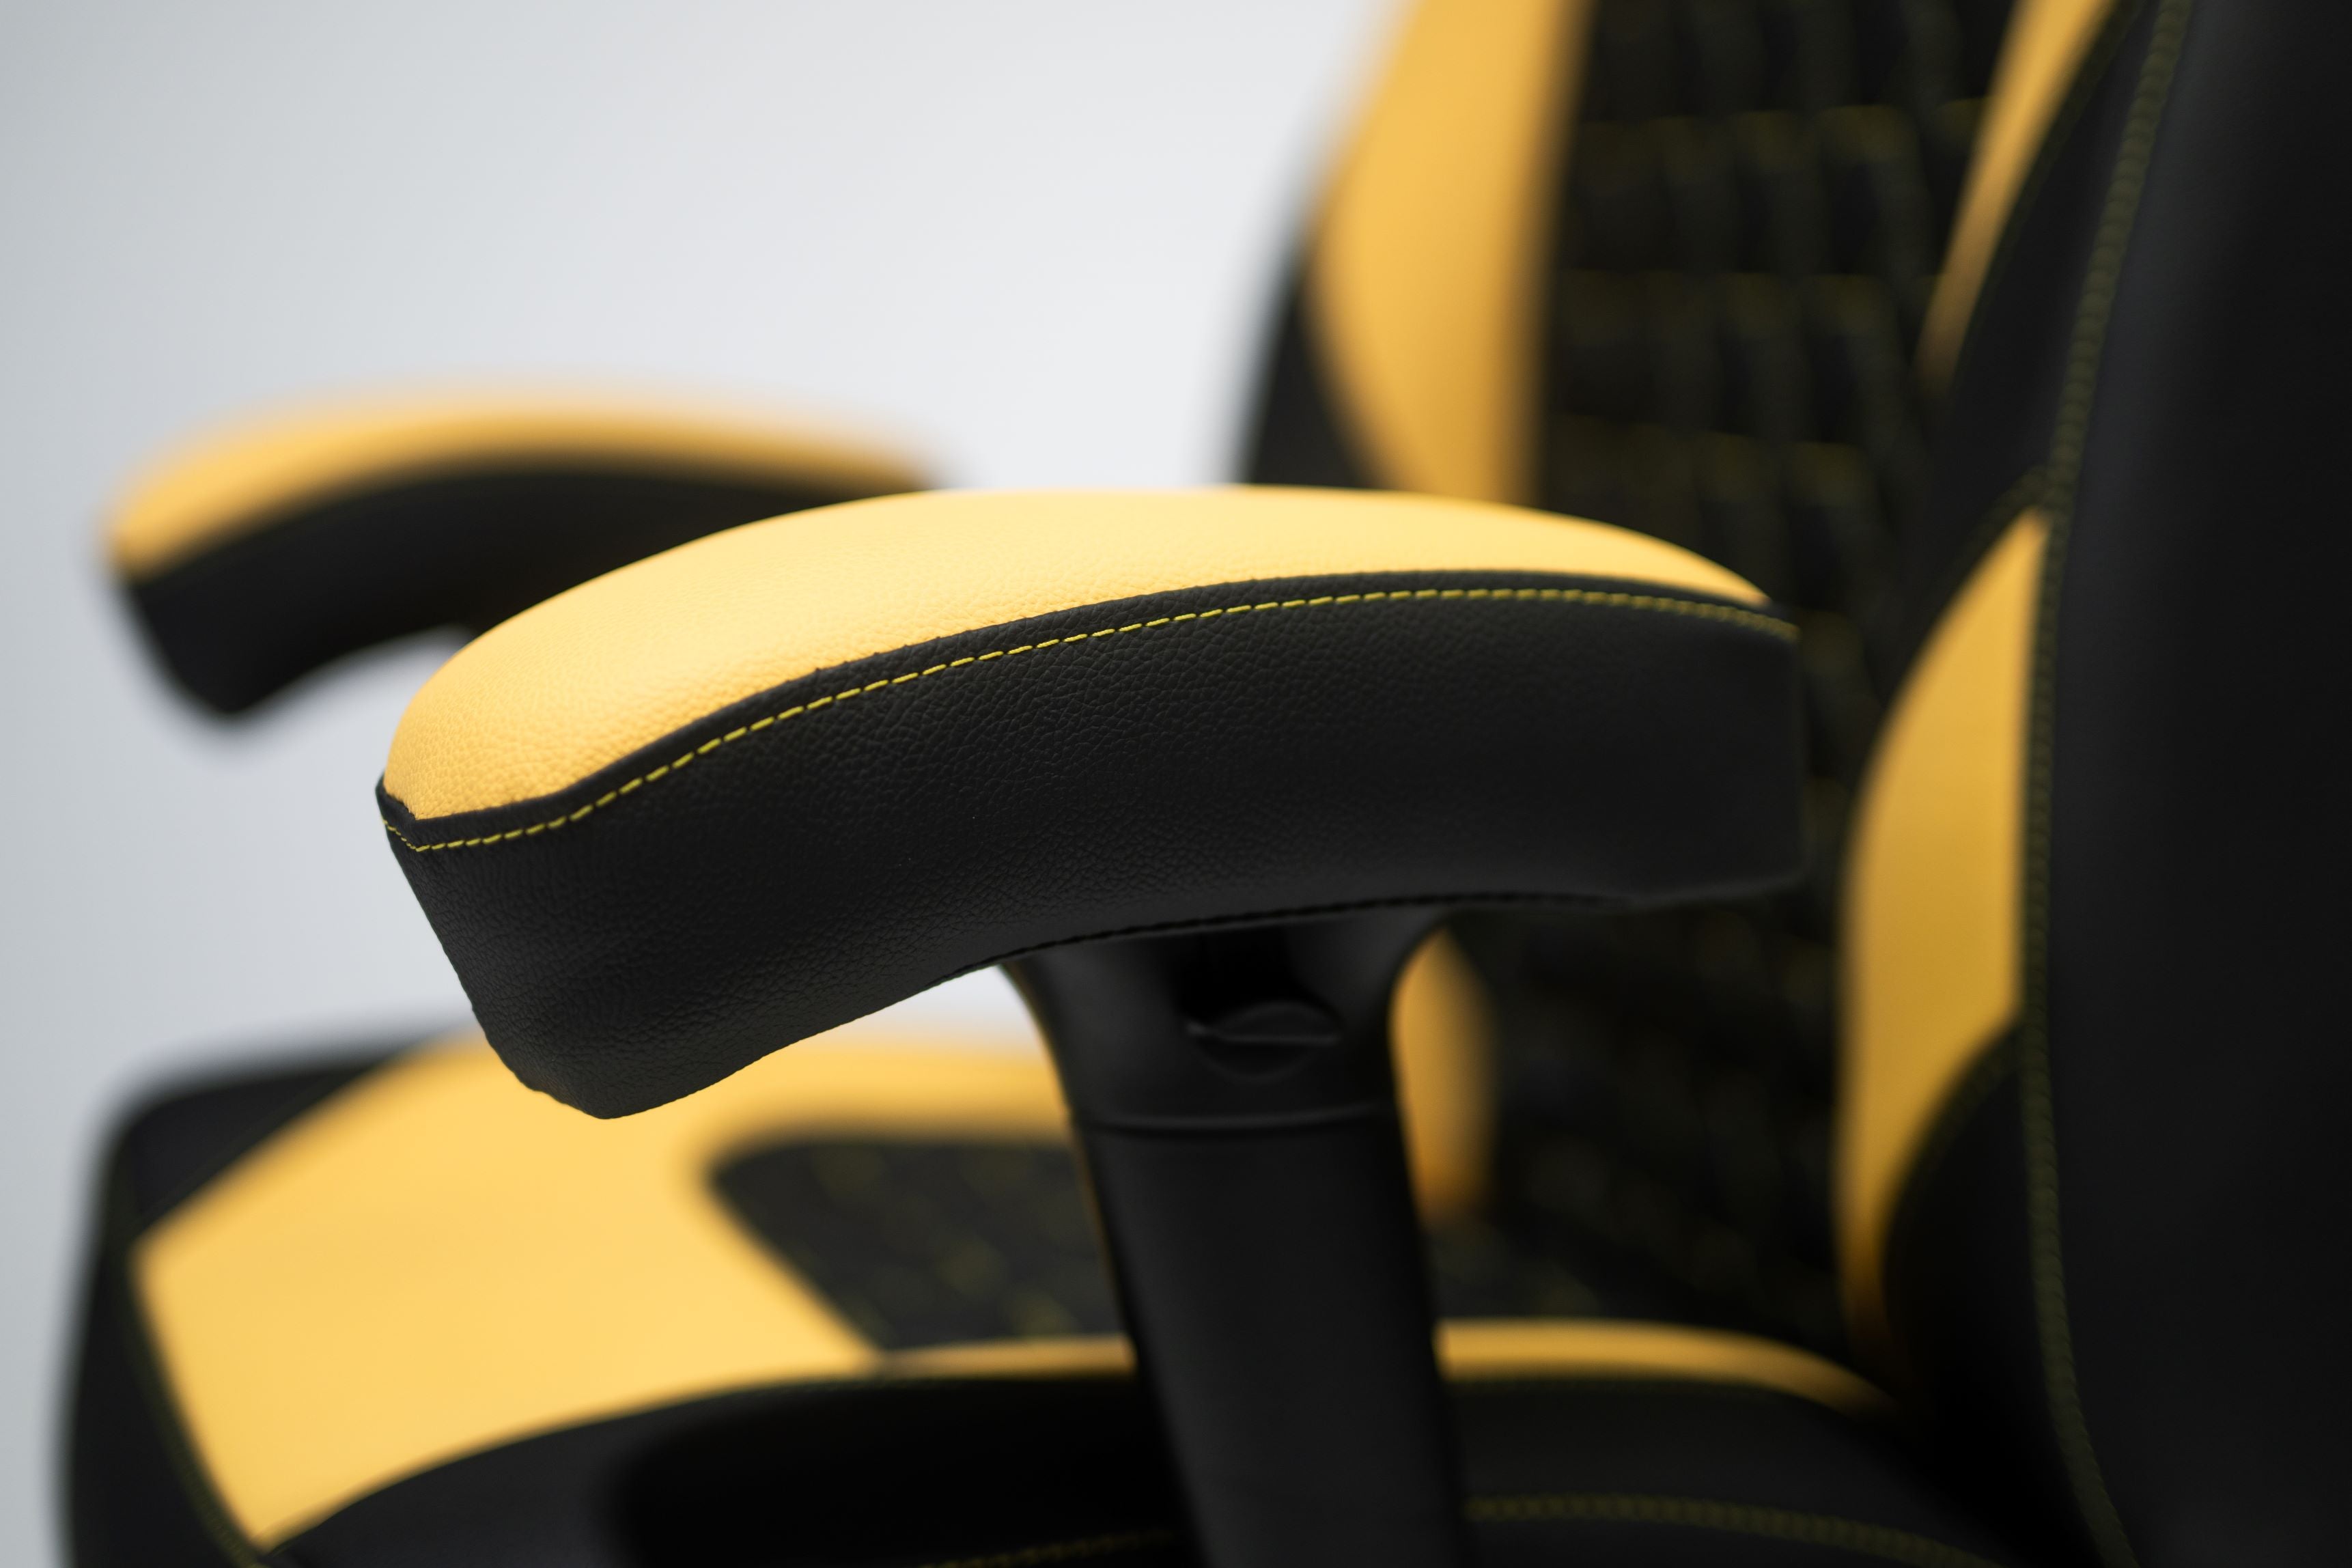 Yellow and Black Gaming chair Armrest Close up.